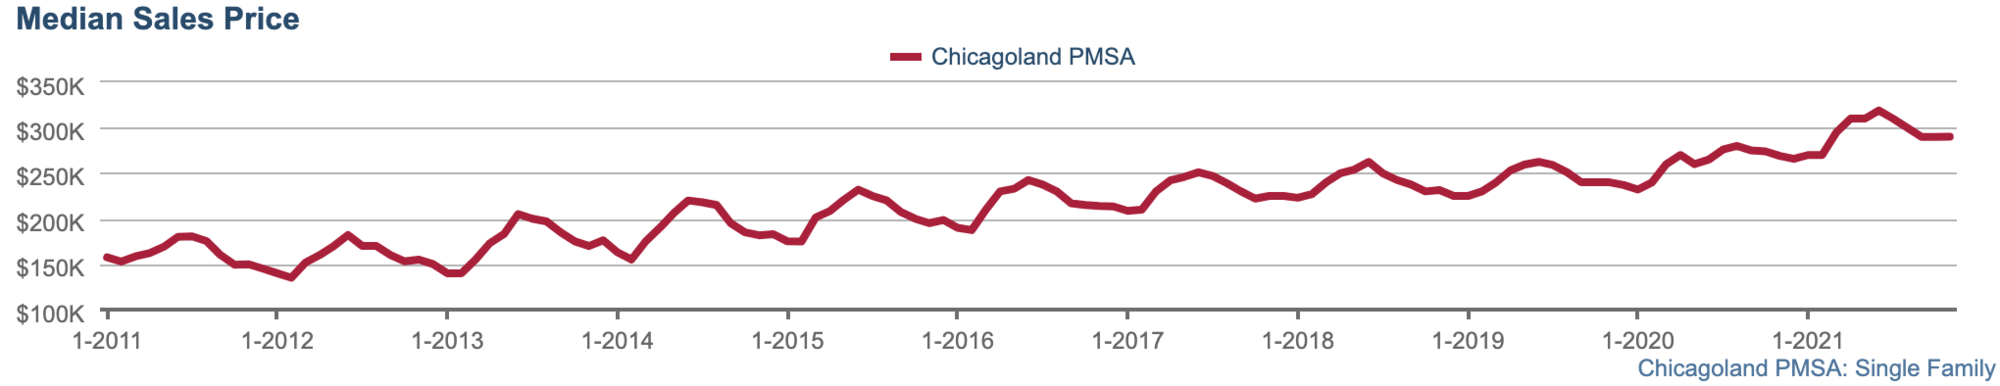 graph displaying historical median home sale prices in Chicago since 2011 and increasing into 2022 